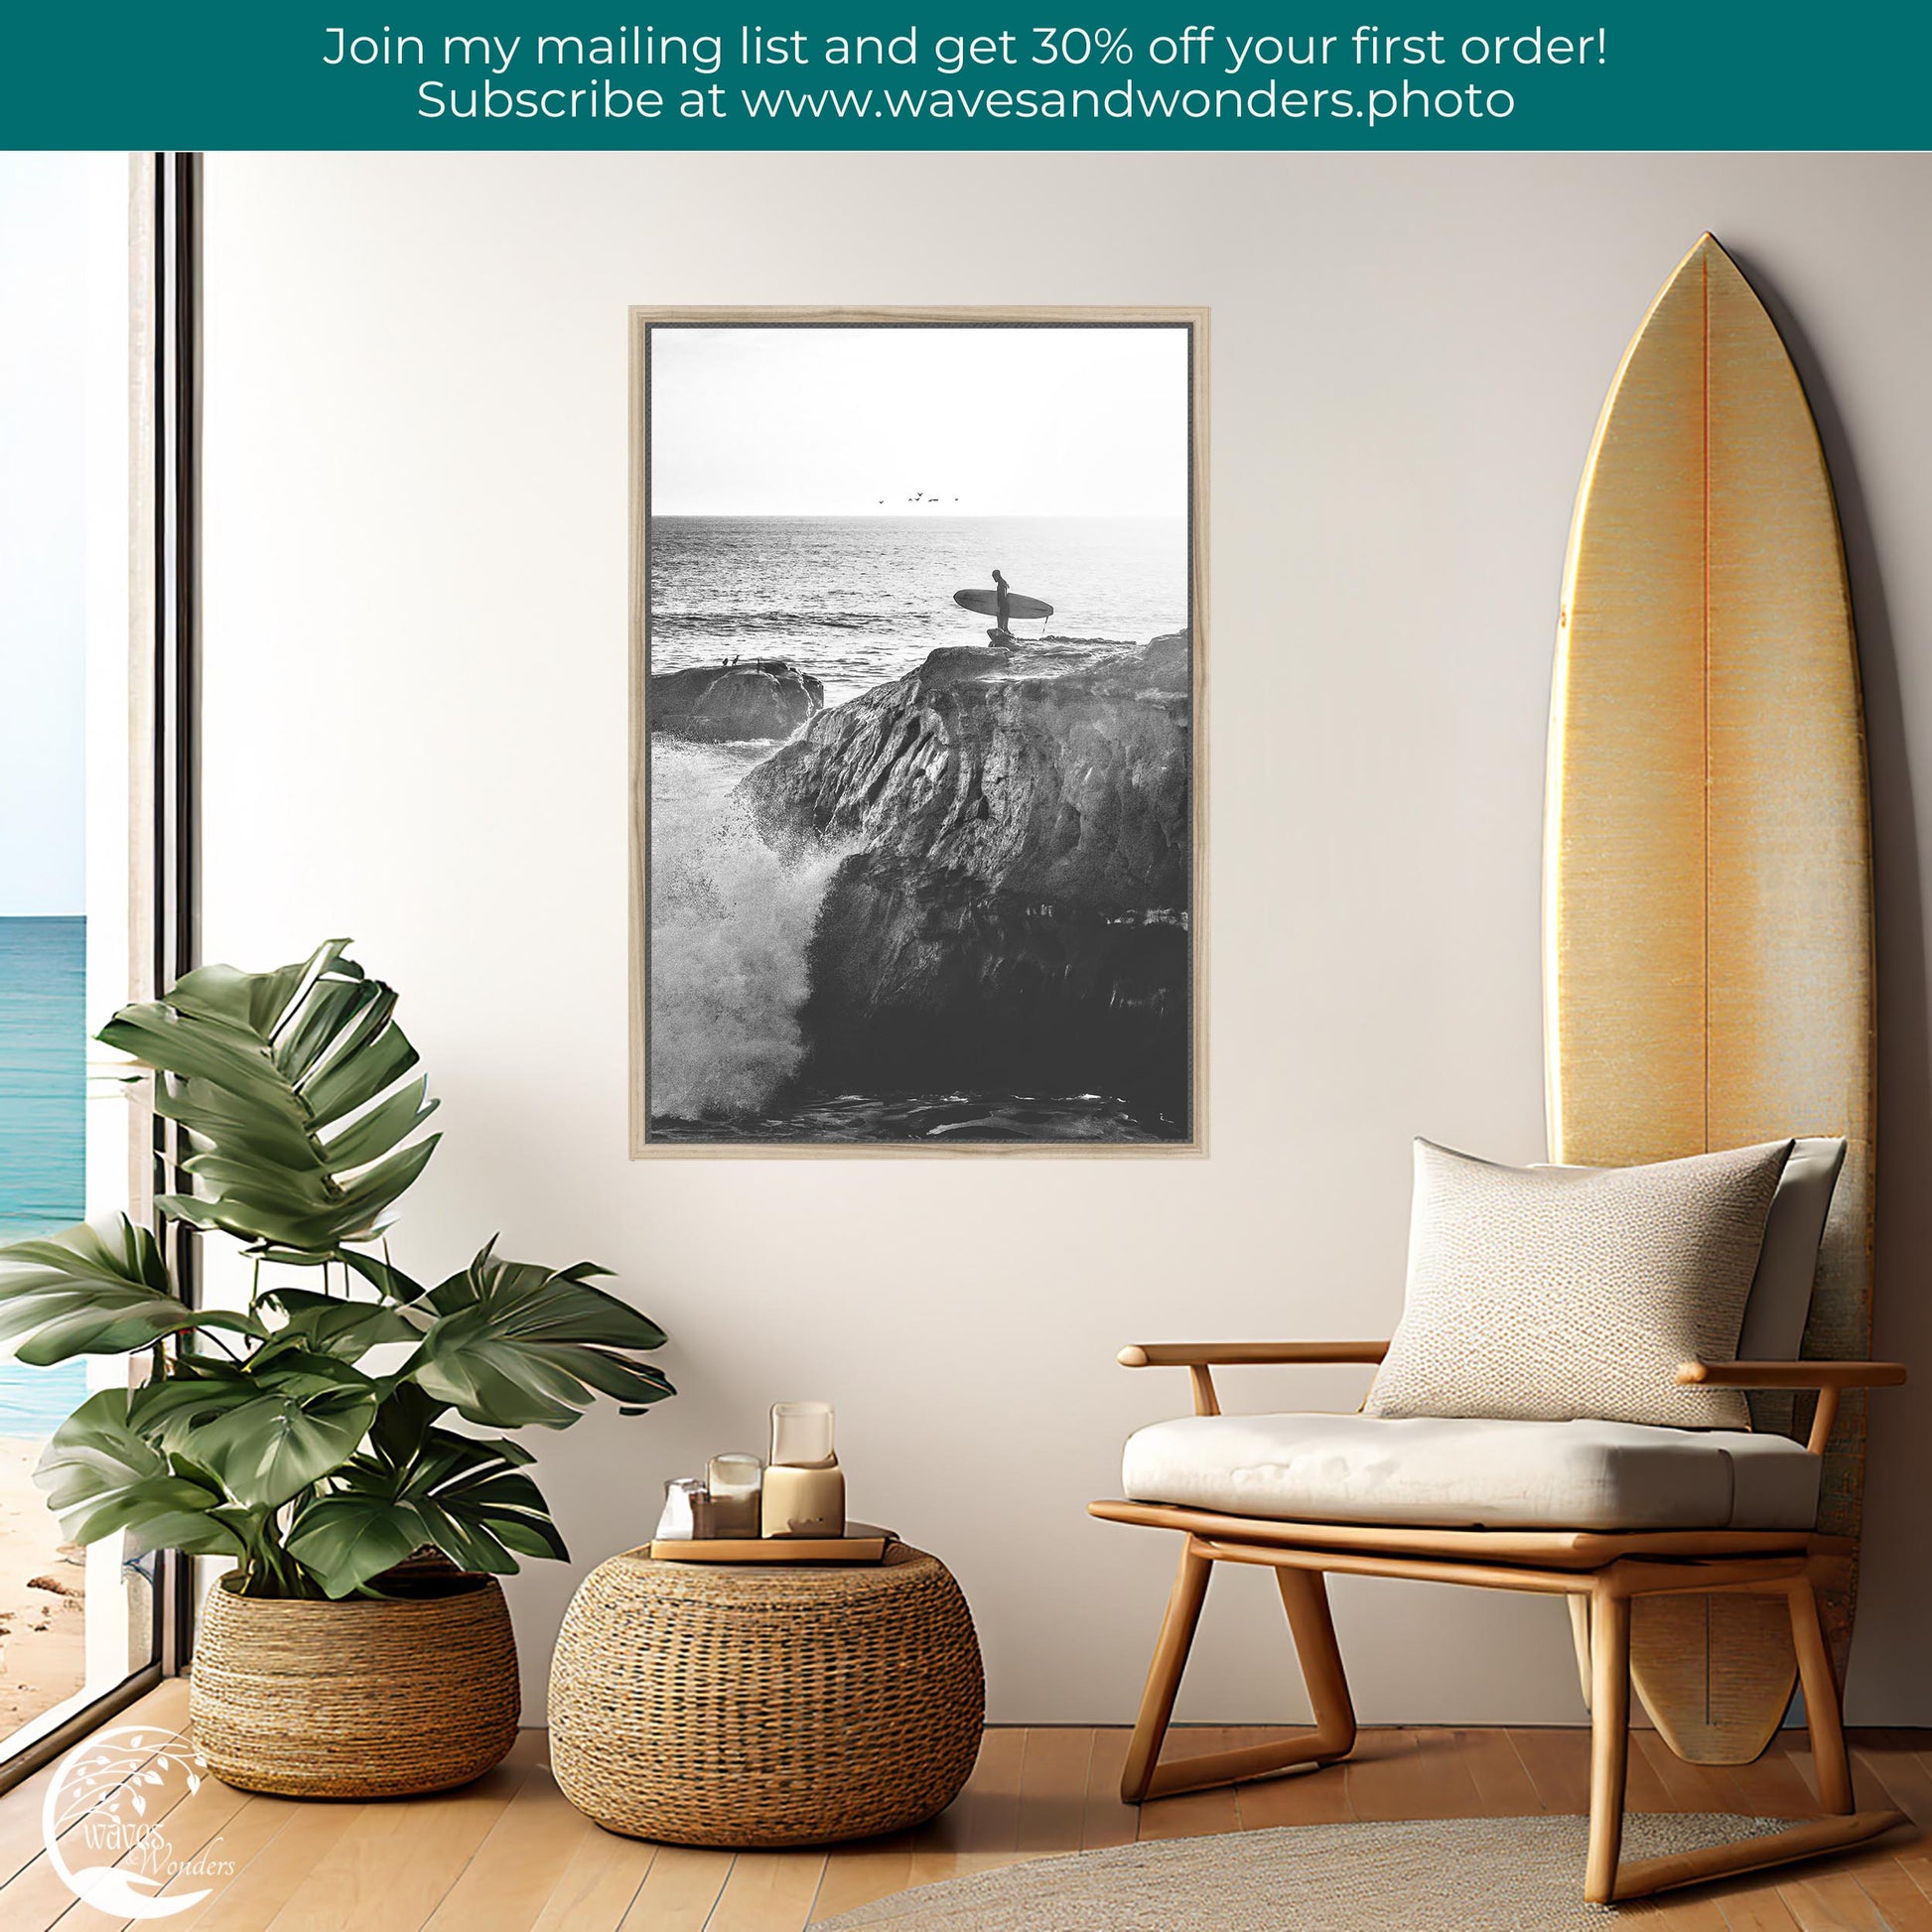 a living room with a surfboard on the wall